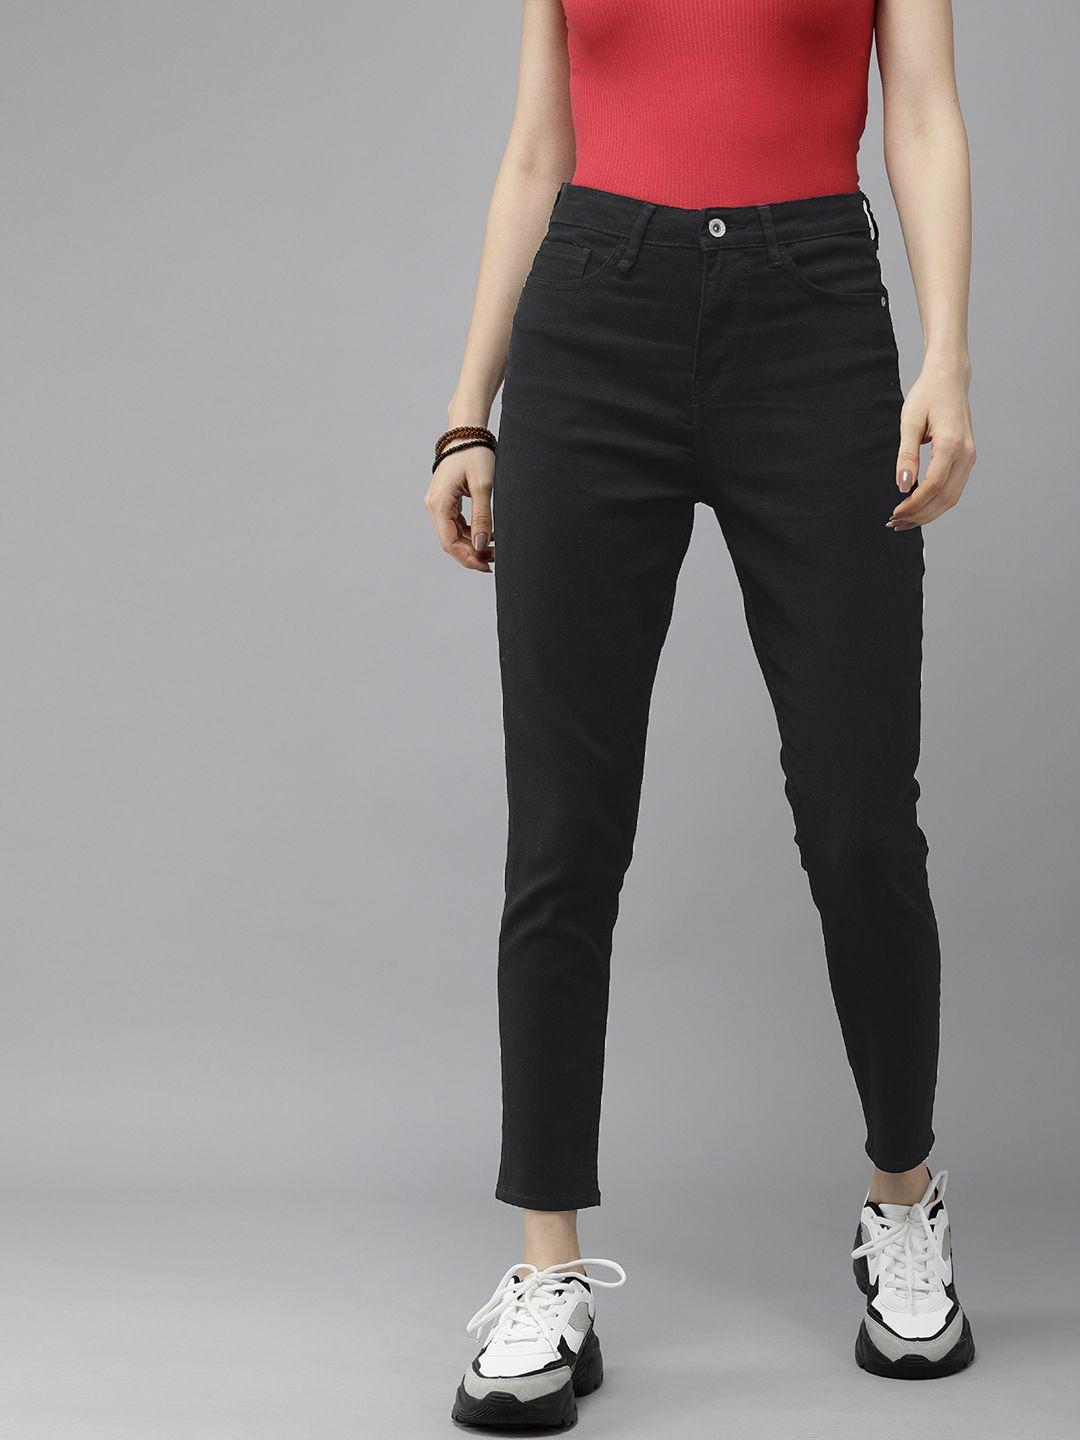 roadster-women-black-skinny-fit-high-rise-stretchable-cropped-jeans